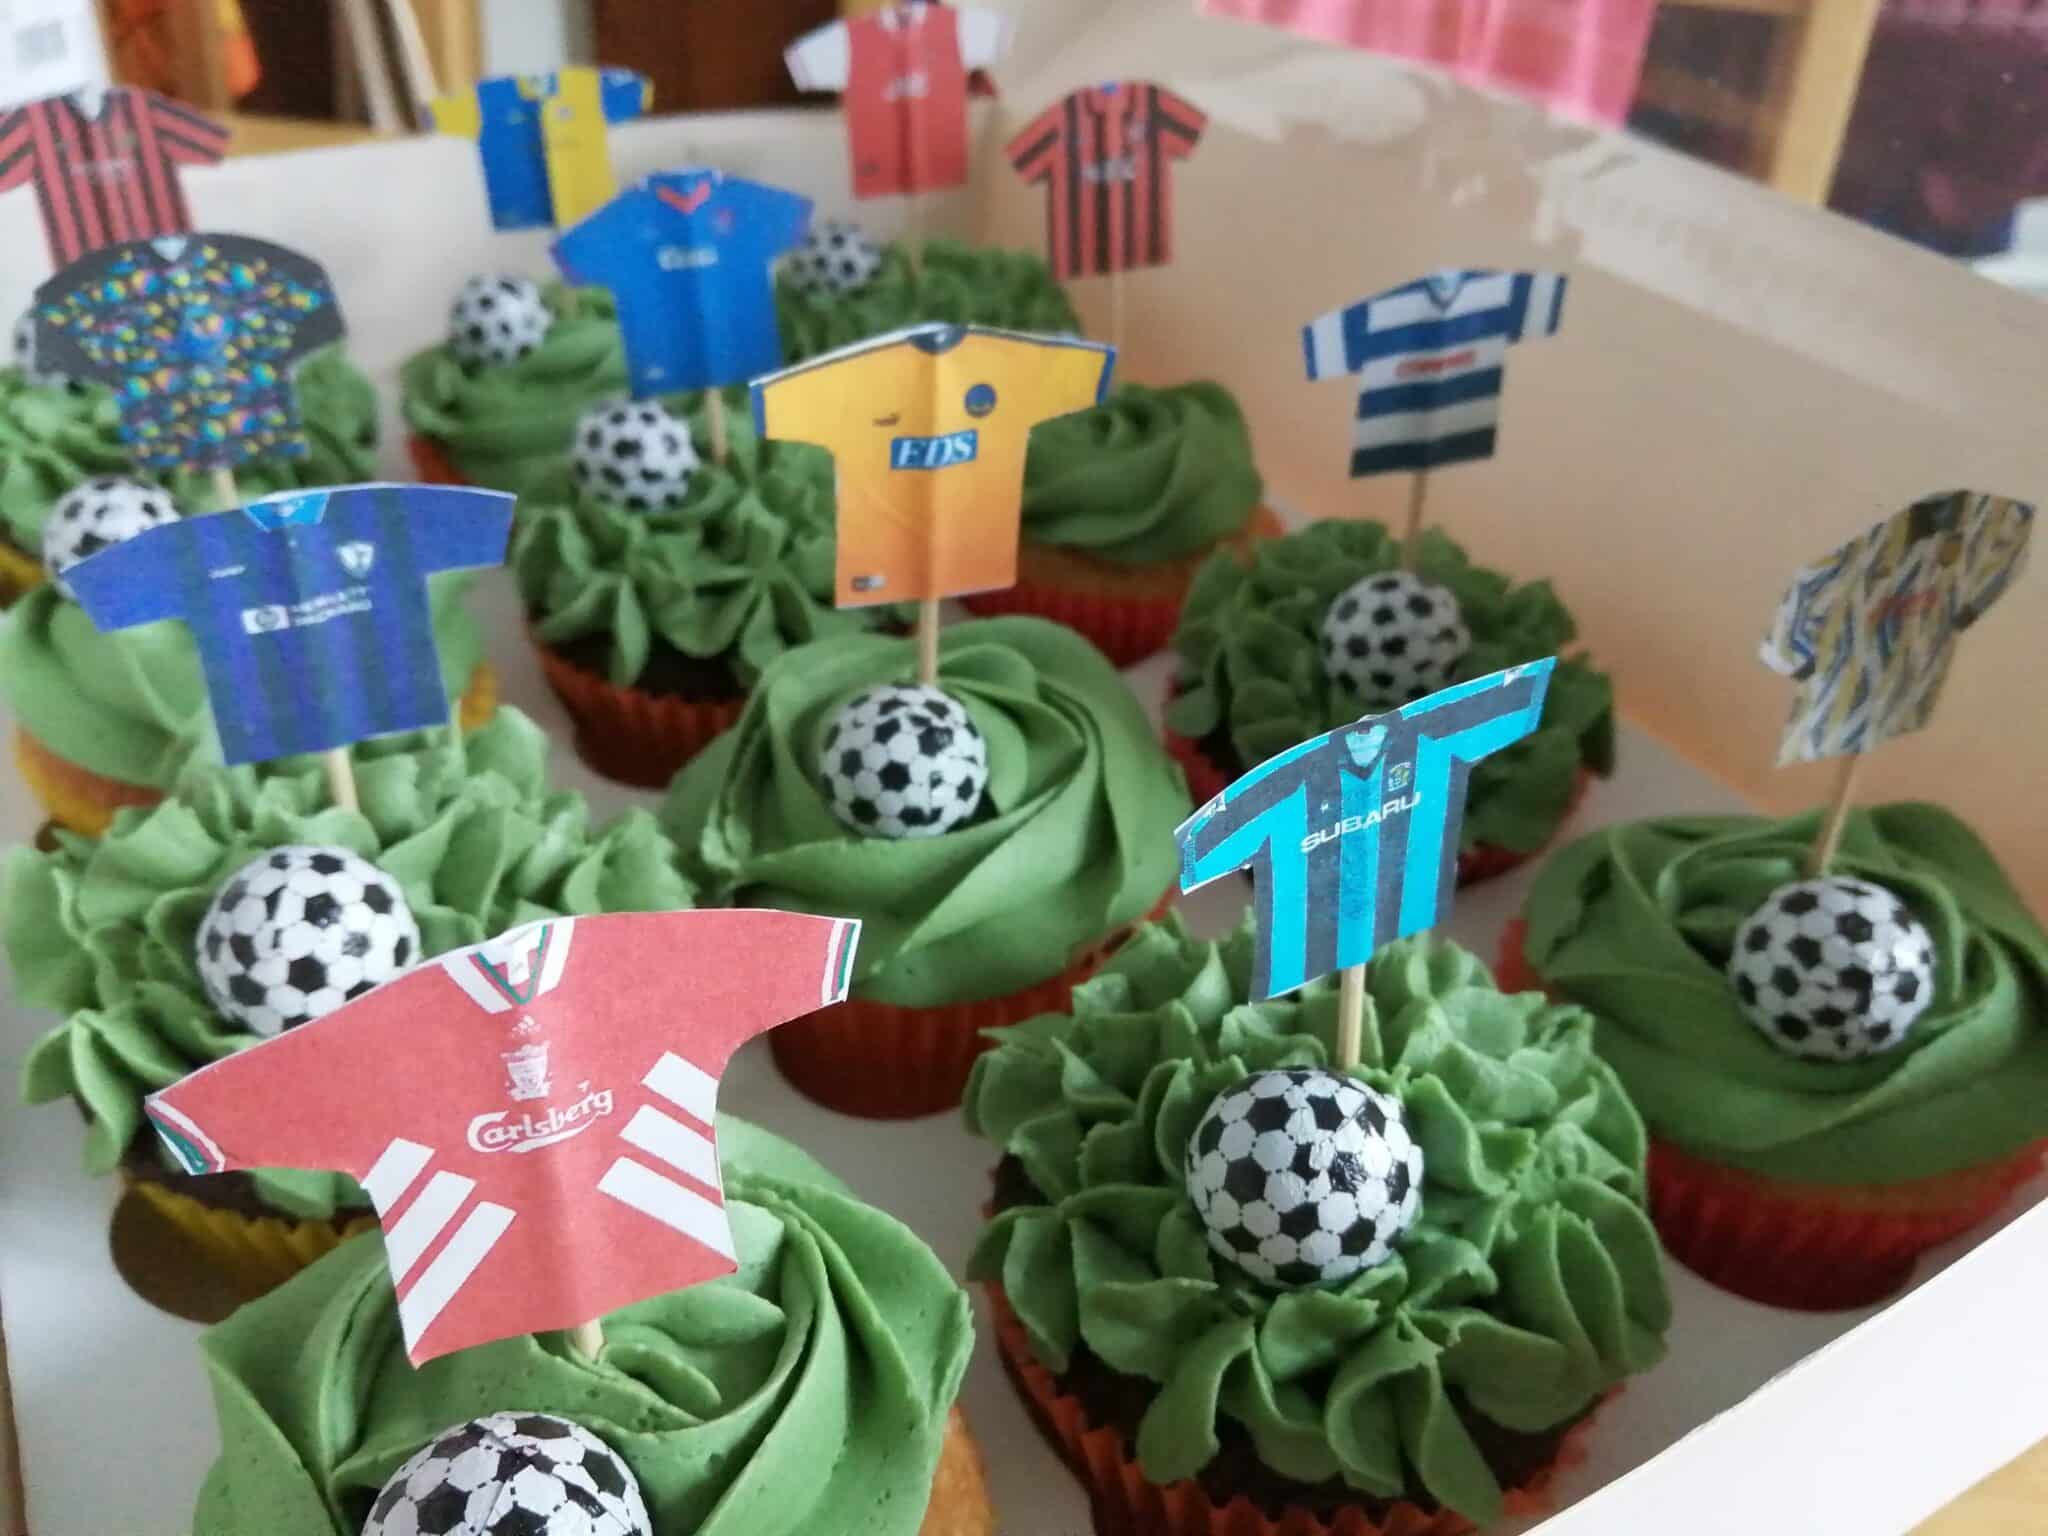 A selection of 90s cupcakes with football toppers